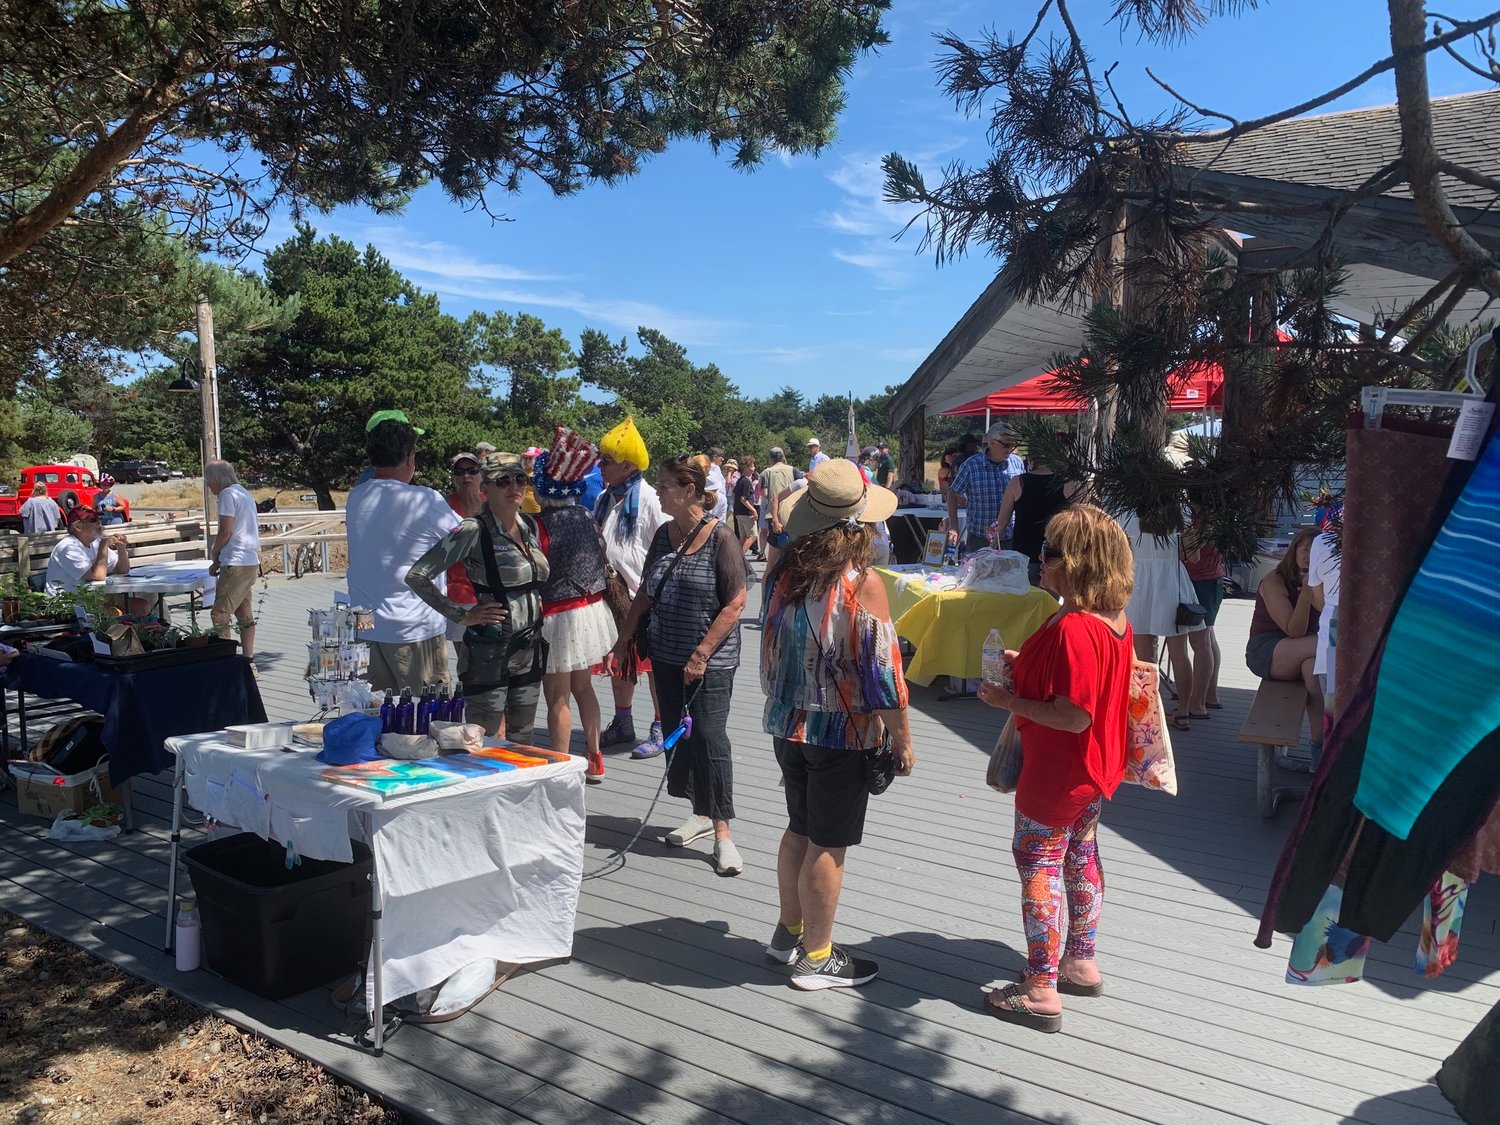 Point Roberts residents enjoy the firefighter BBQ and Artisan Market at the Lighthouse Marine Park boardwalk.